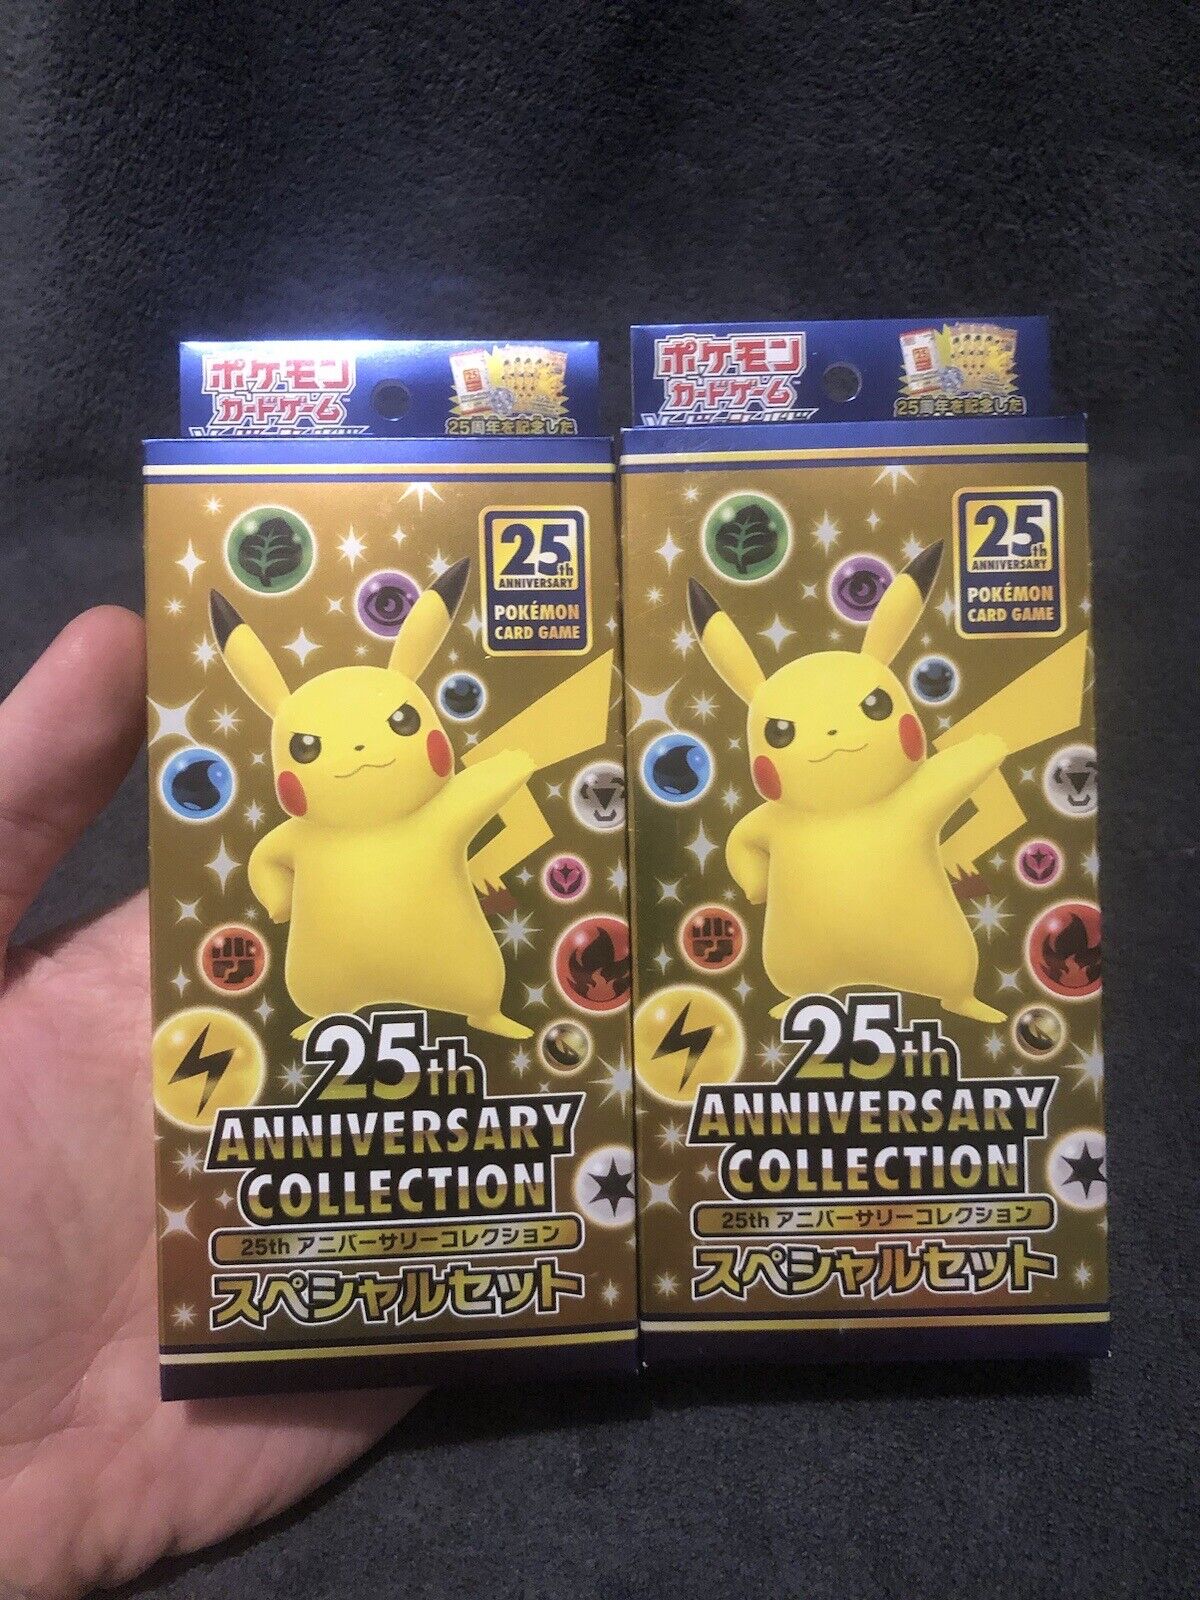 Pokémon Card Game 25th Anniversary Special Collection Japanese Set. 2 Boxes